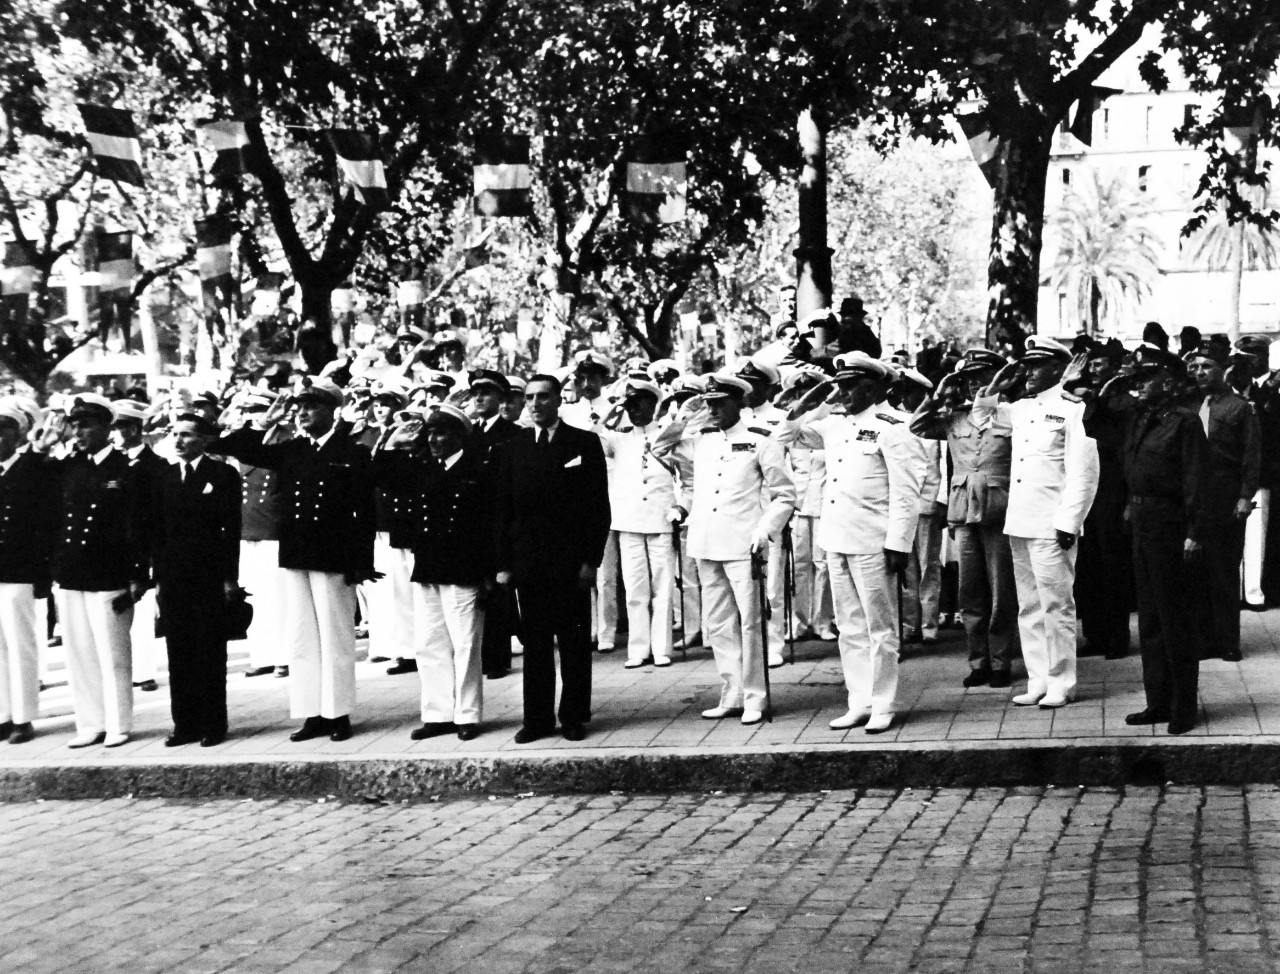 80-G-248724:   Invasion of Southern France, Toulon,  September 1944.   Ceremonies in Toulon celebrating the liberation of France.  Taken by USS Philadelphia (CL-41), 14 September 1944.   Shown (left to right):  Admiral Jaujard; Admiral Auboyneau; Navy Minister Jaquinot; Admiral Lambert, Commander in Chief, French Naval Forces; Admiral Lemonier; M. Arnal, Mayor of Toulon; Sir John Cunningham, Commander in Chief, Royal Navy; Vice Admiral Kent H. Hewitt; Rear Admiral L.A. Davidson; Major General A. Wilson, USA, during parade on De Strasbourg Boulevard, Toulon.  Official U.S. Navy Photograph, now in the collection of the National Archives.  (2014/4/10). 